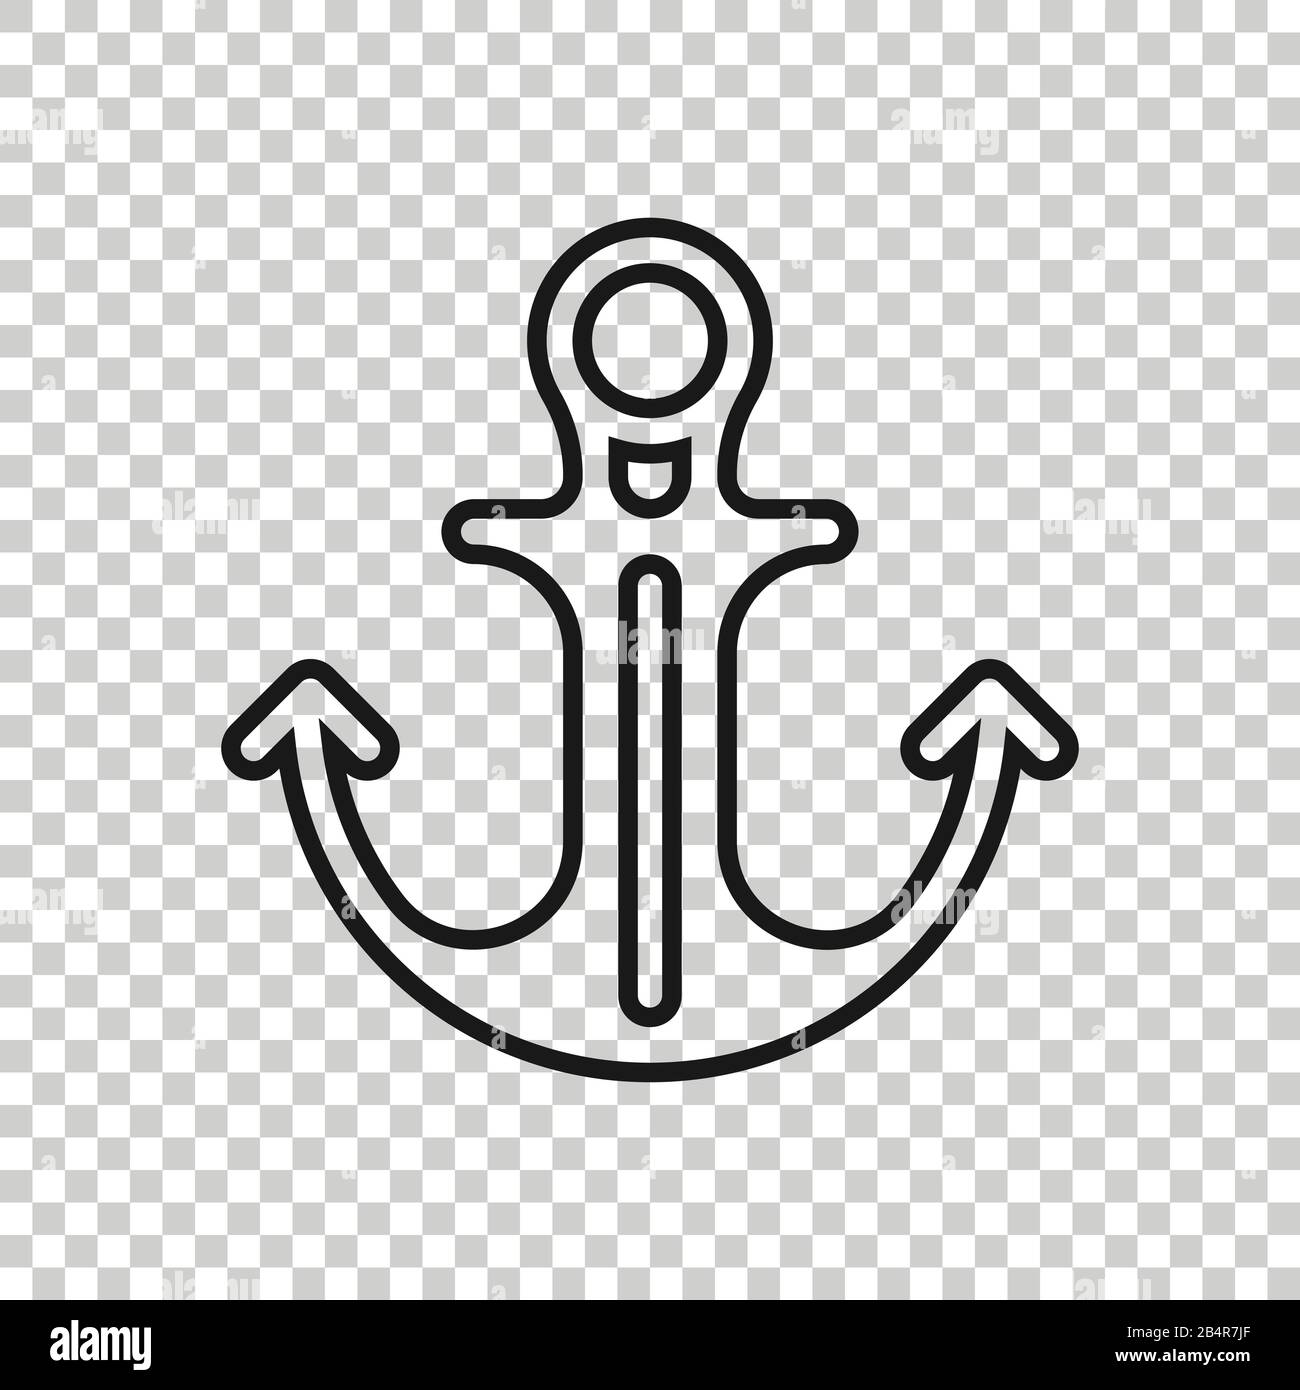 Anchor flat icon Black and White Stock Photos & Images - Page 3